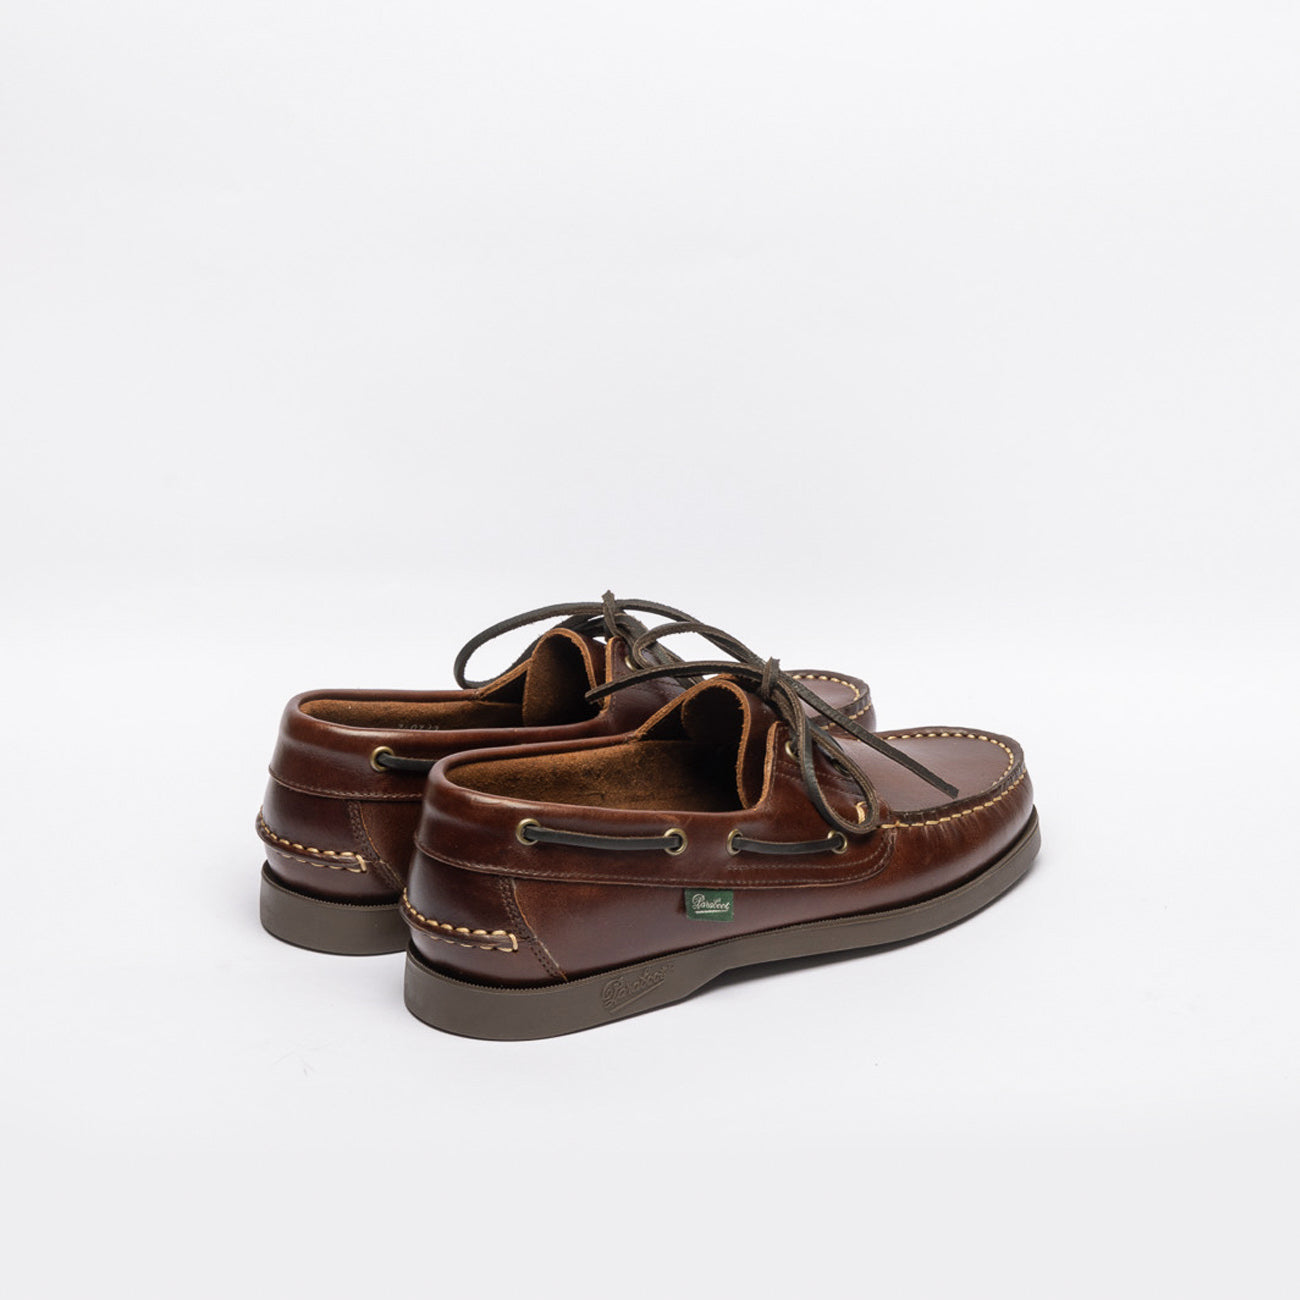 Paraboot Barth brown leather boat shoe